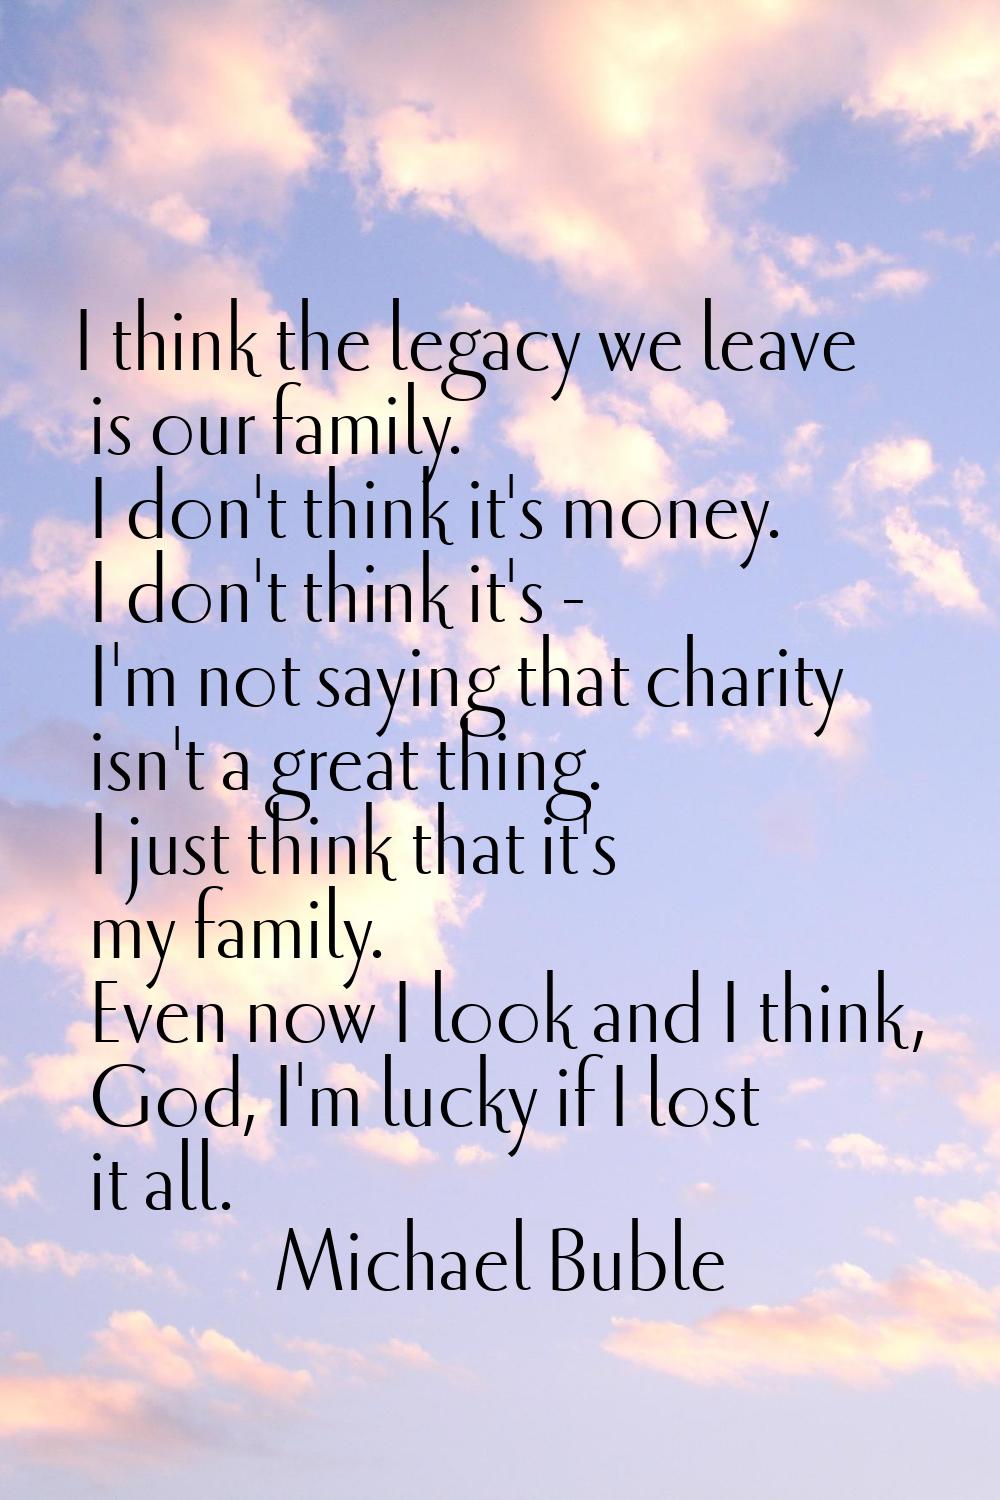 I think the legacy we leave is our family. I don't think it's money. I don't think it's - I'm not s